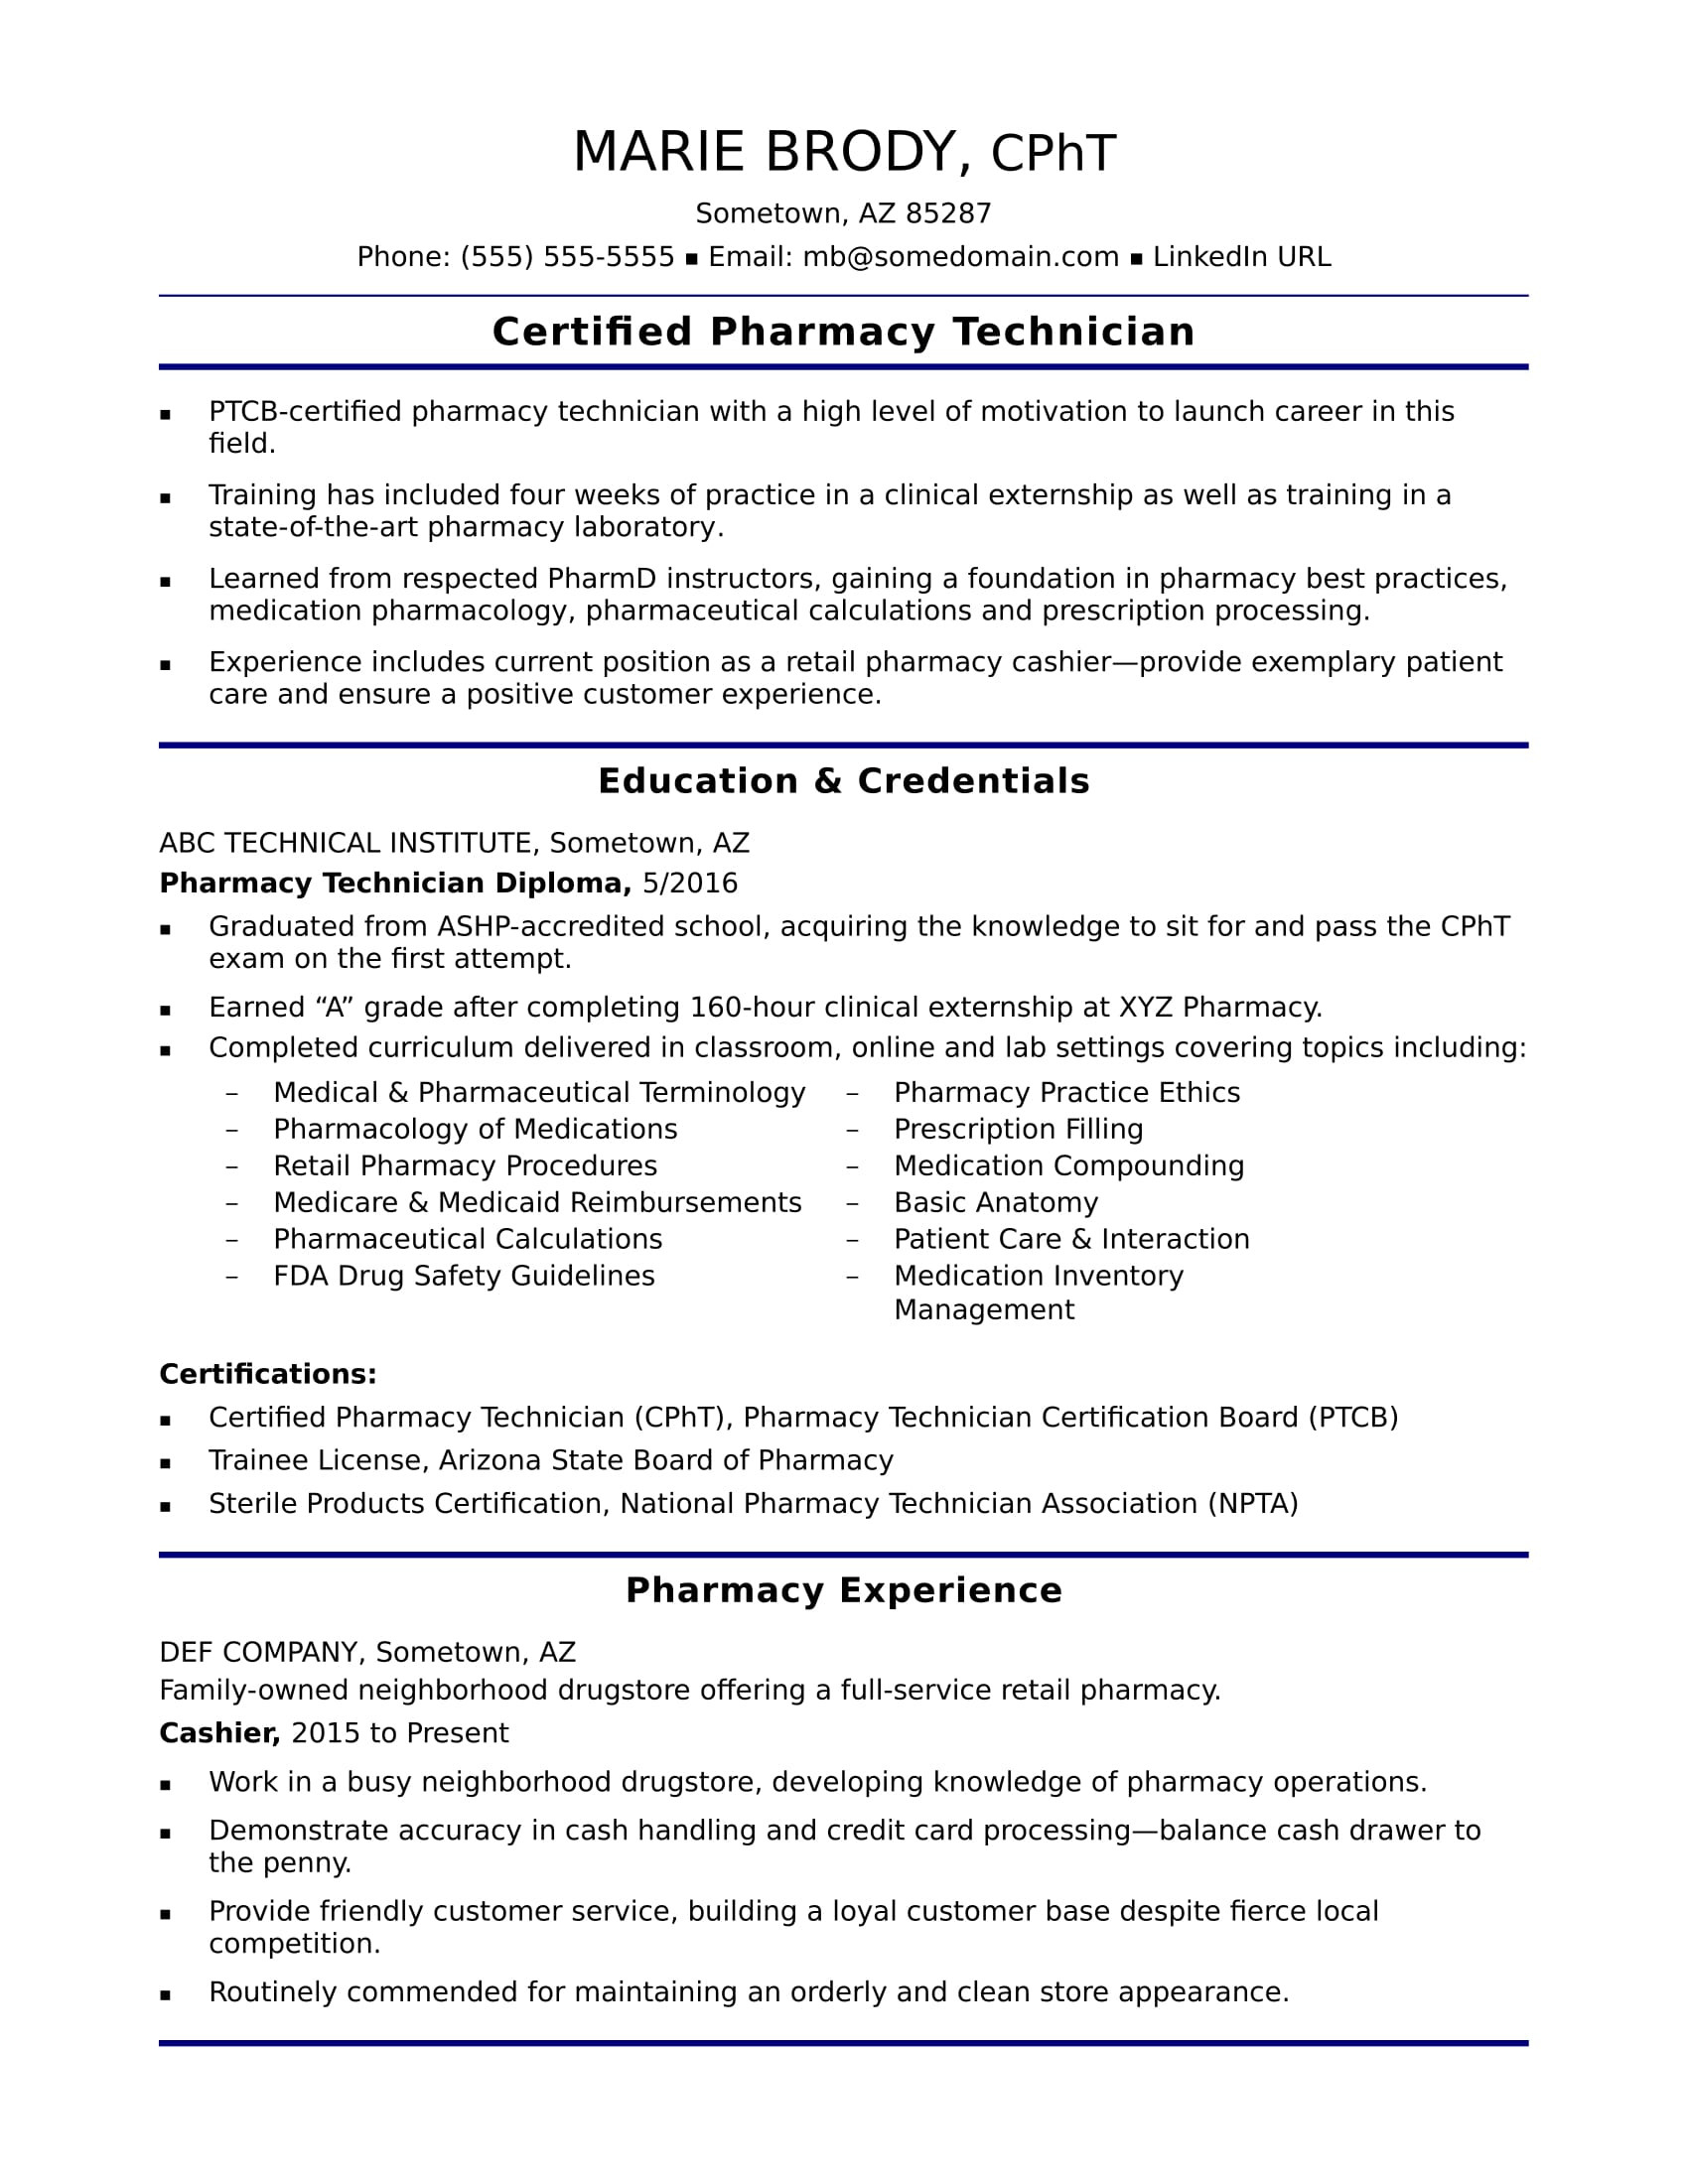 Sample Resume for Pharmacy assistant without Experience Pharmacy assistant Resume No Experience October 2021